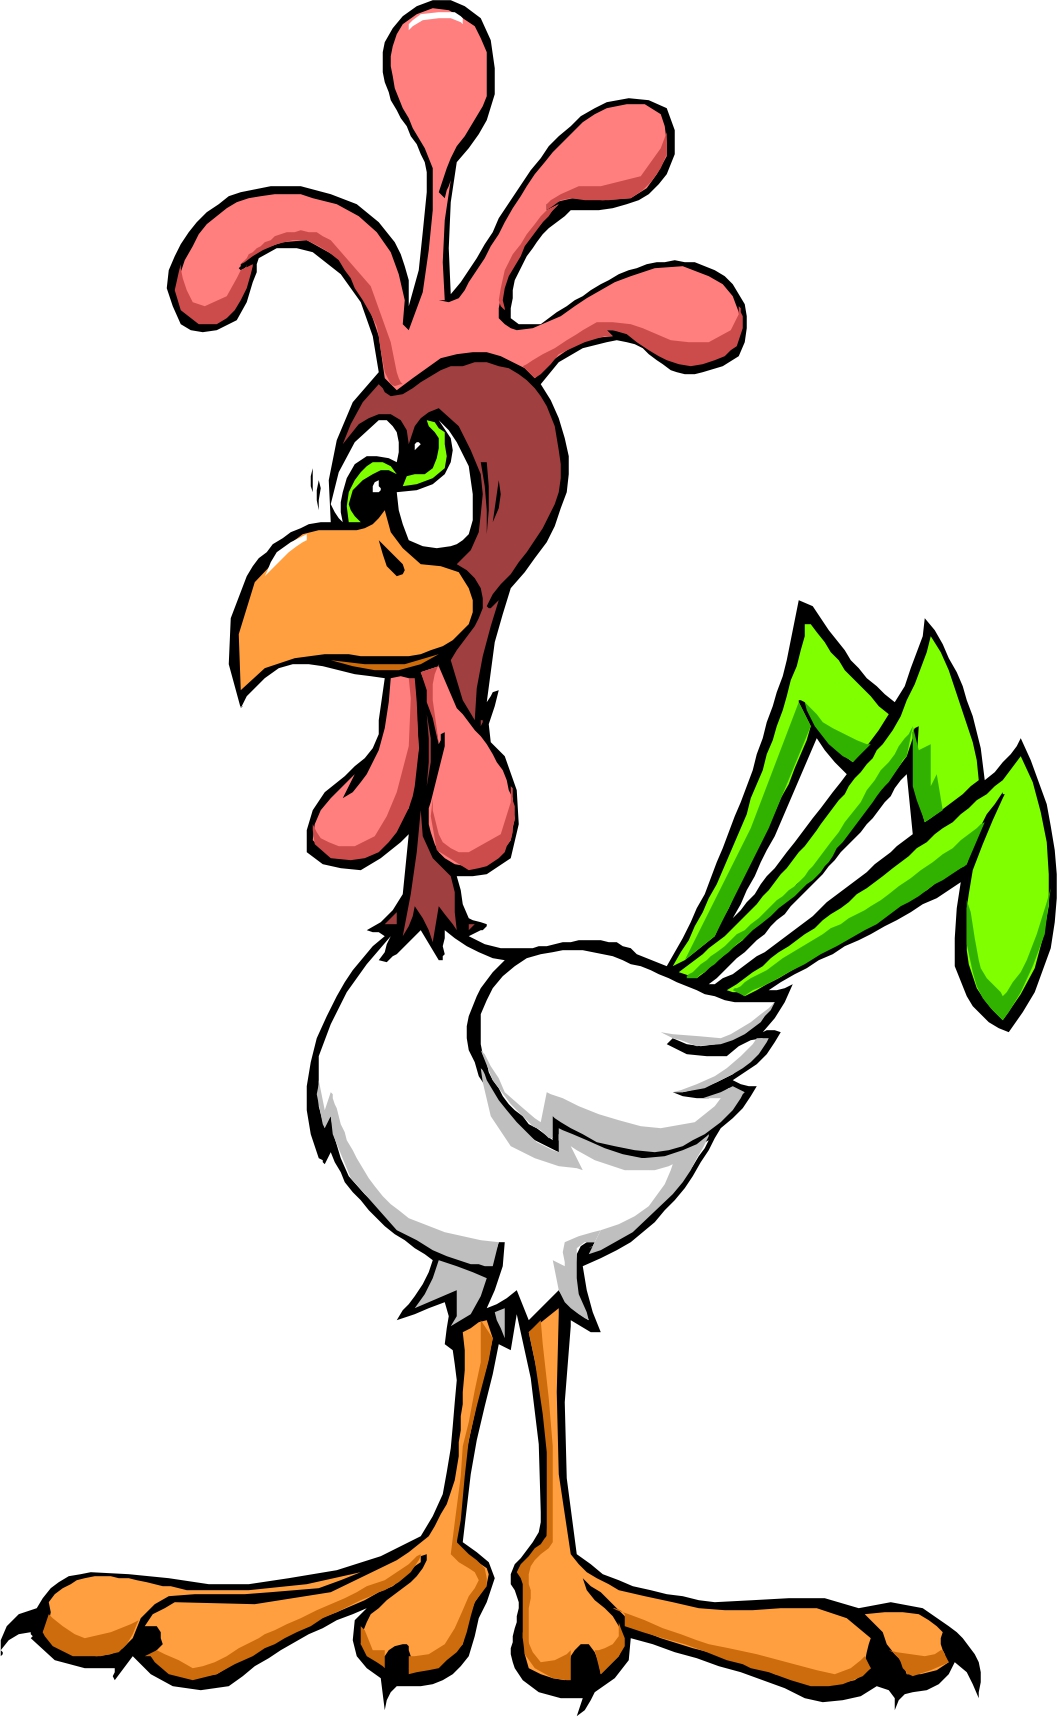 Free Cartoon Pictures Of A Chicken, Download Free Cartoon Pictures Of A